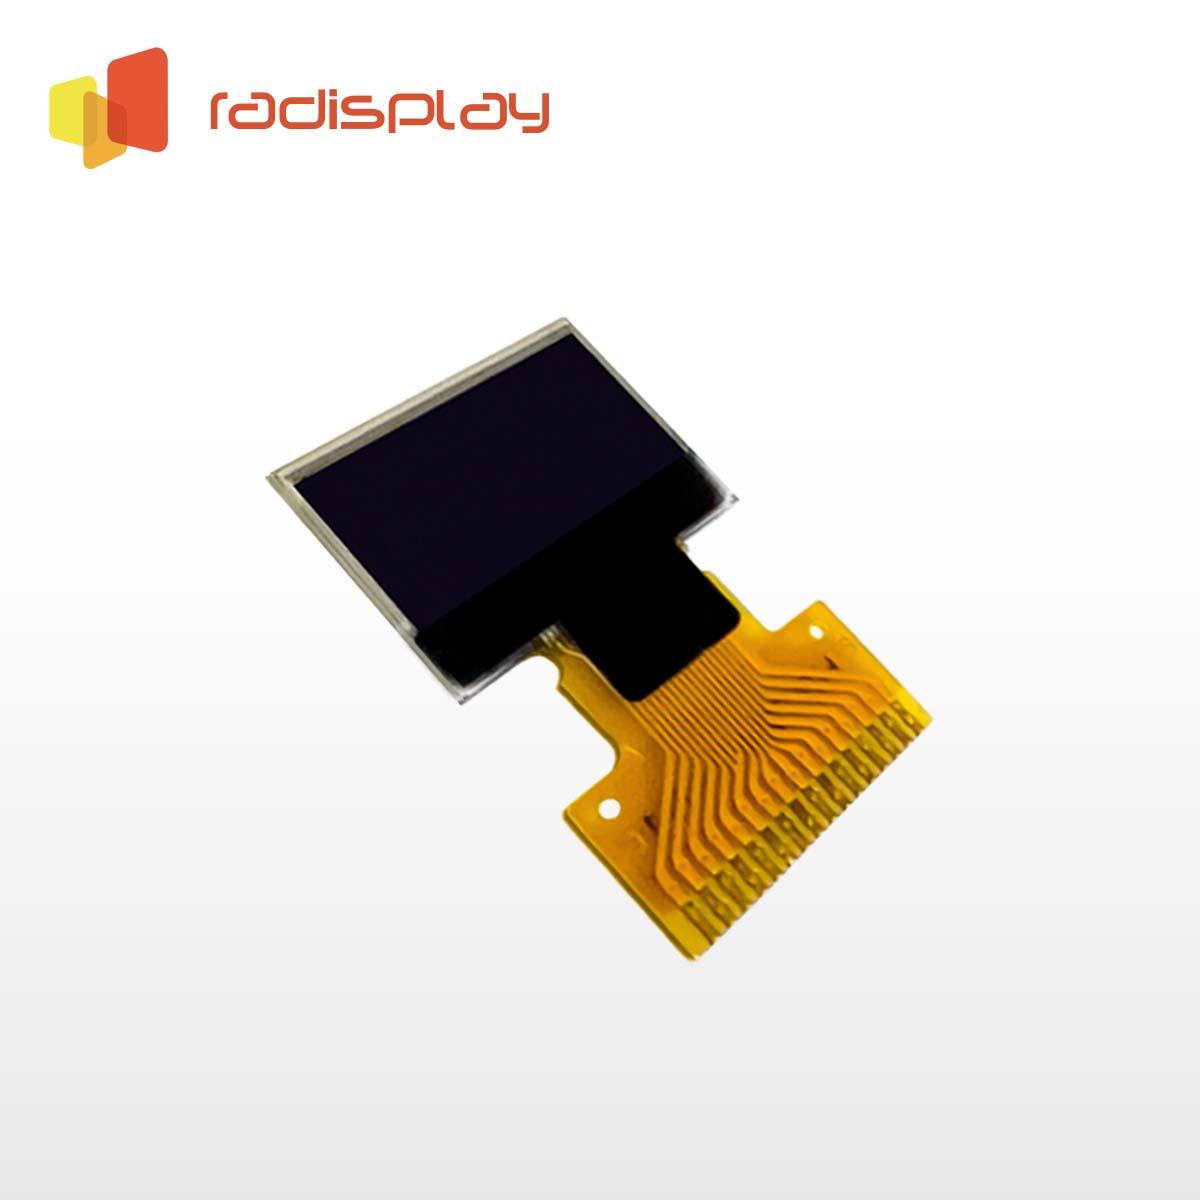 0.42 inch 72x40 Dots White OLED  Display - SPI I2C interface with SSD1315 controller